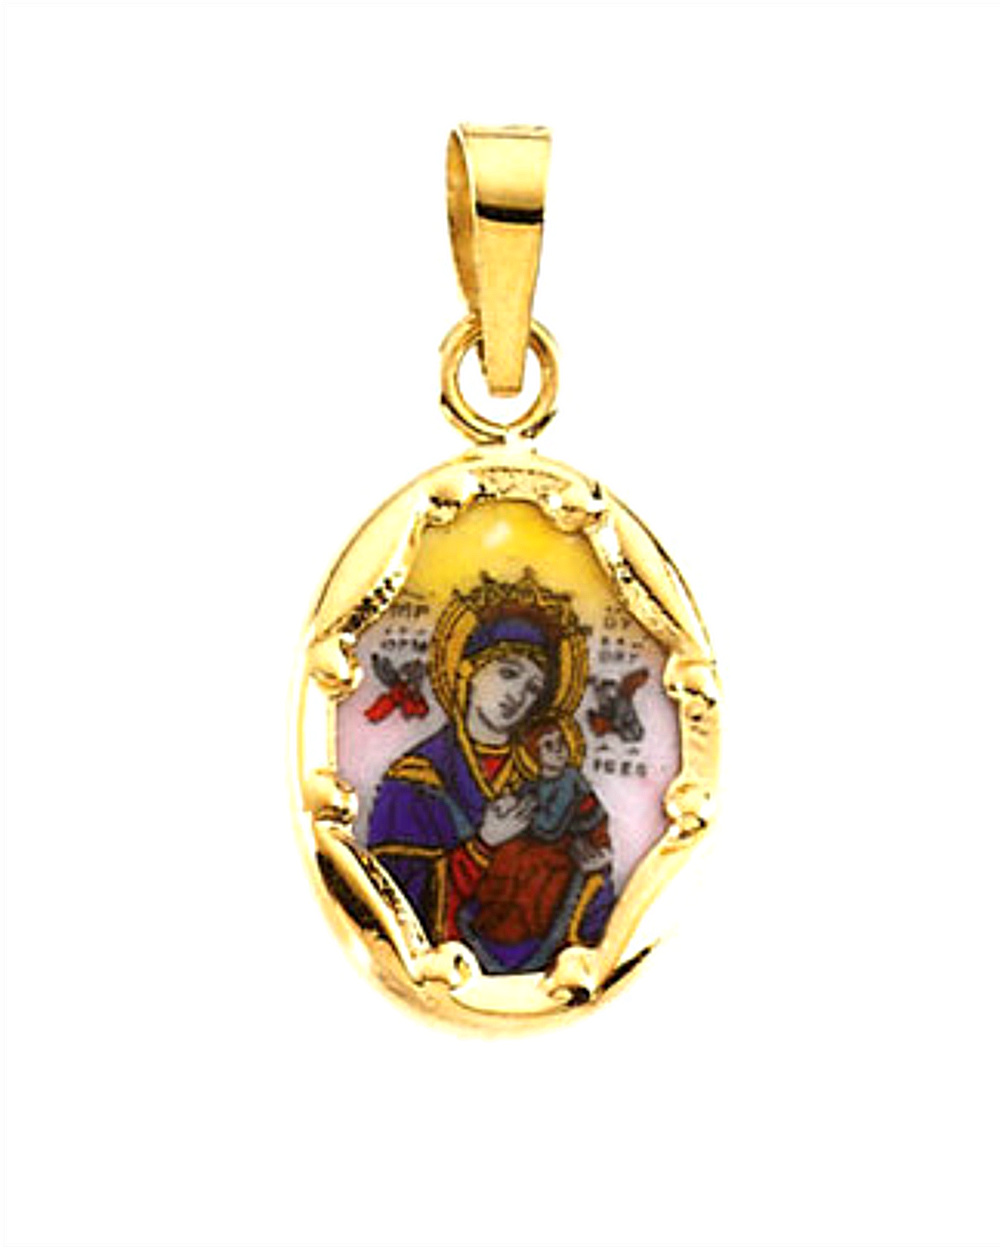 14k Yellow Gold Our Lady of Perpetual Help Hand-Painted Porcelain Medal (13x10 MM) R16971_1000MP